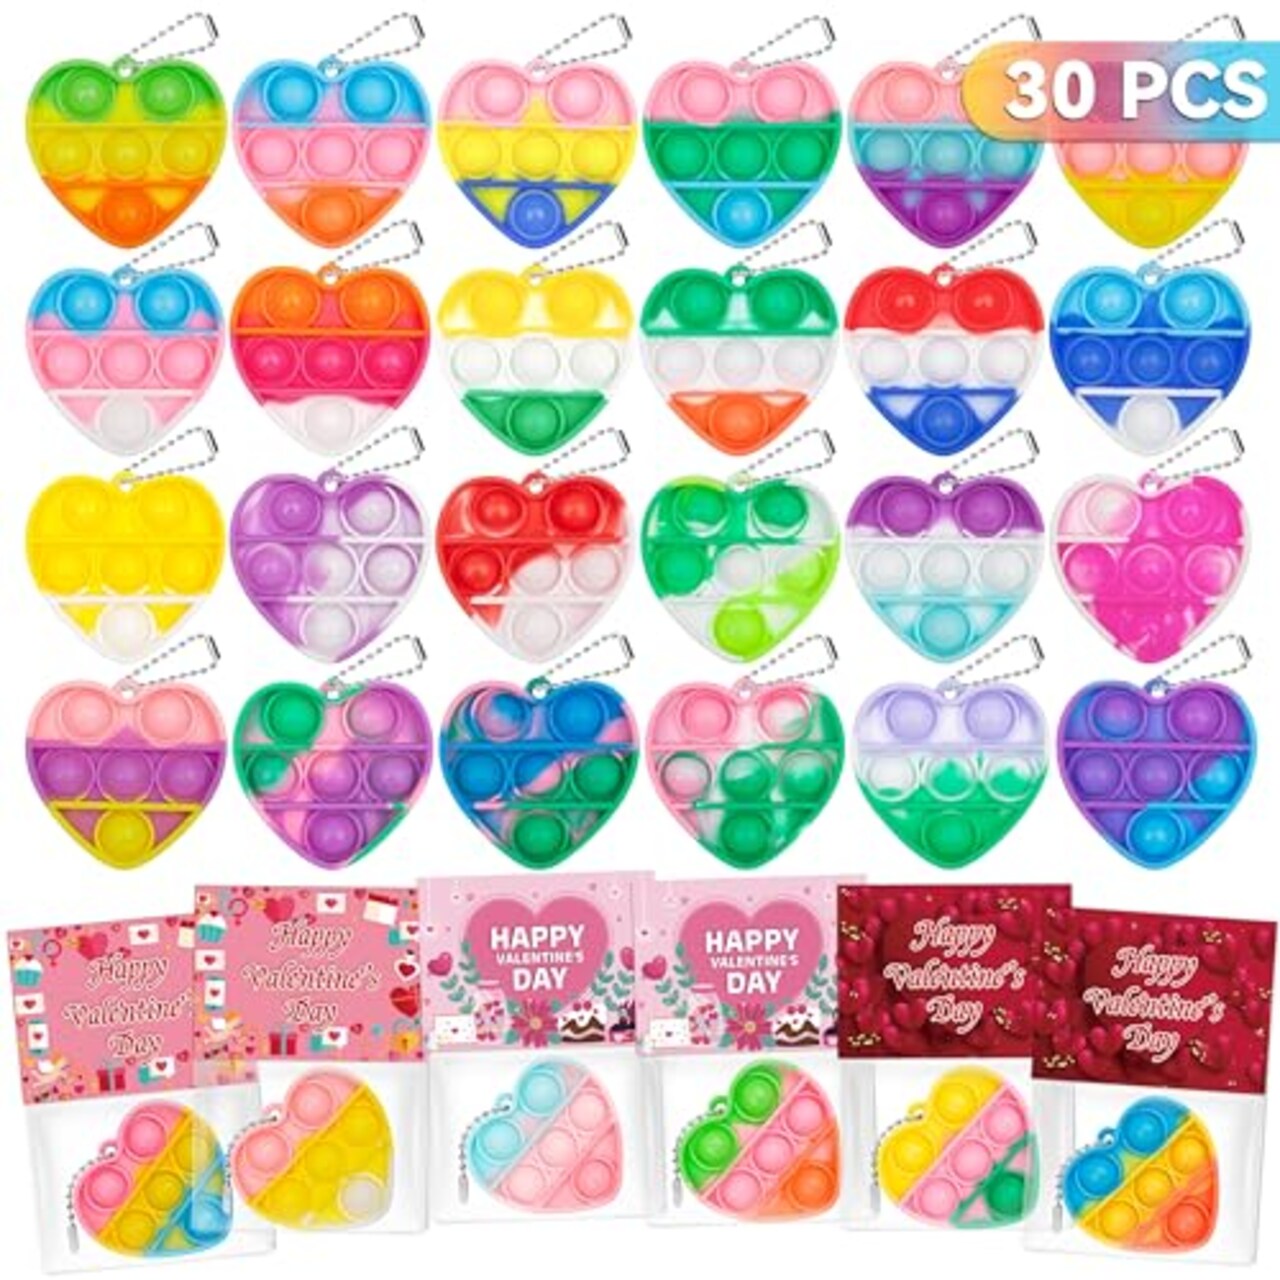 30 Pack Valentines Day Gifts for Kids School Party Favors kids